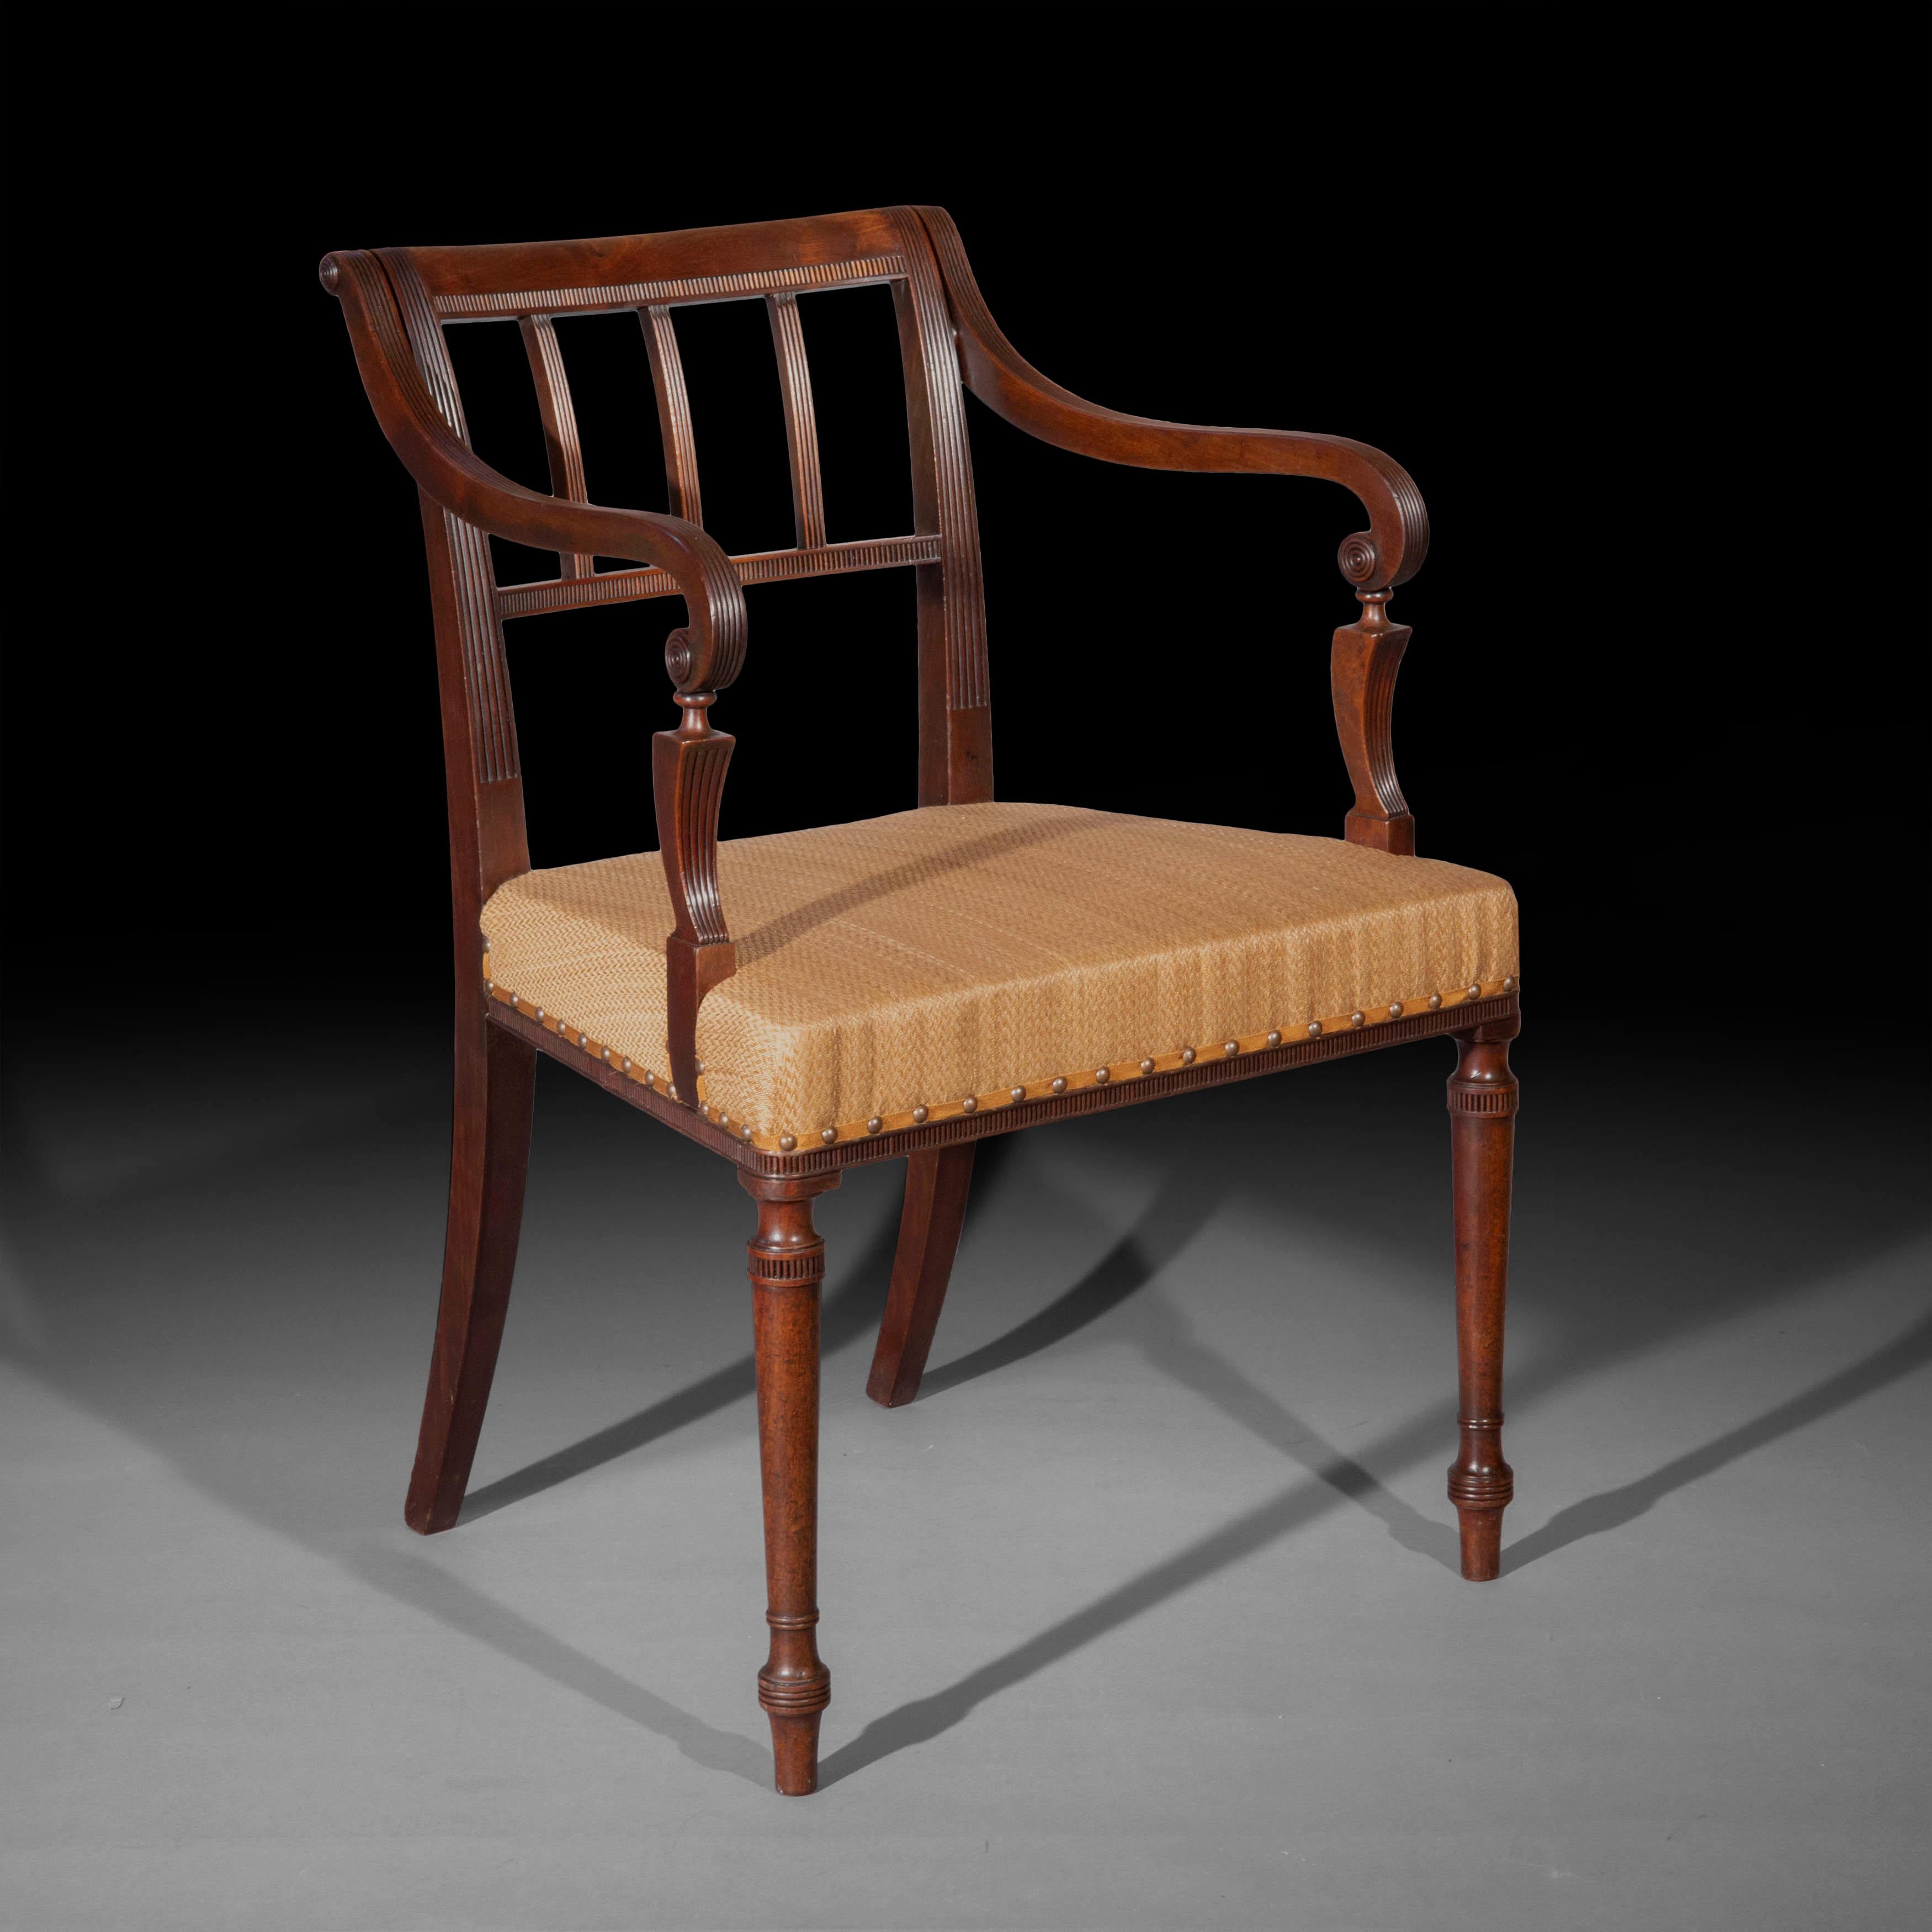 Hand-Carved Early 19th Century Armchair or Desk Chair